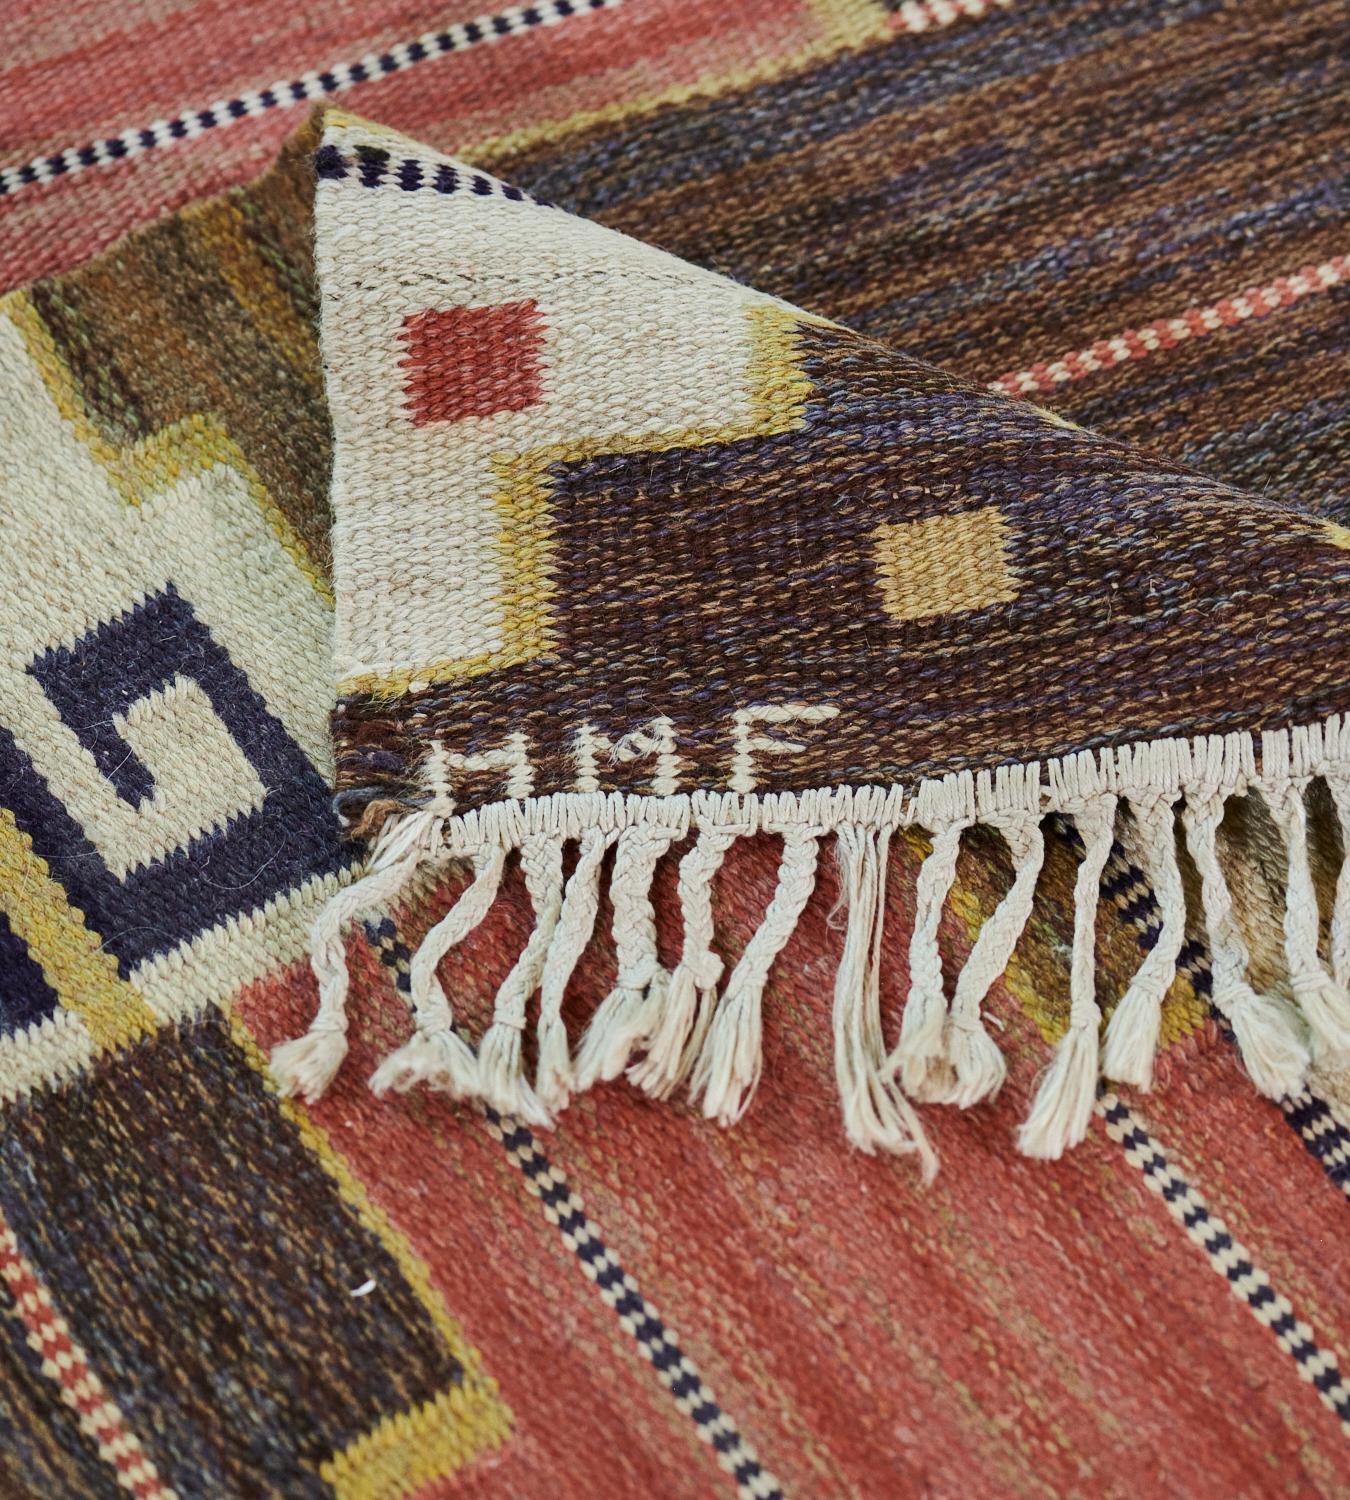 This mid-century signed Swedish rug has a field with shaded terracotta, chocolate-brown, sandy-brown and light burgundy-red stepped and linked lozenges outlined with a yellow stripe, horizontal rows of tiny ivory and black checkerboard stripes, in a